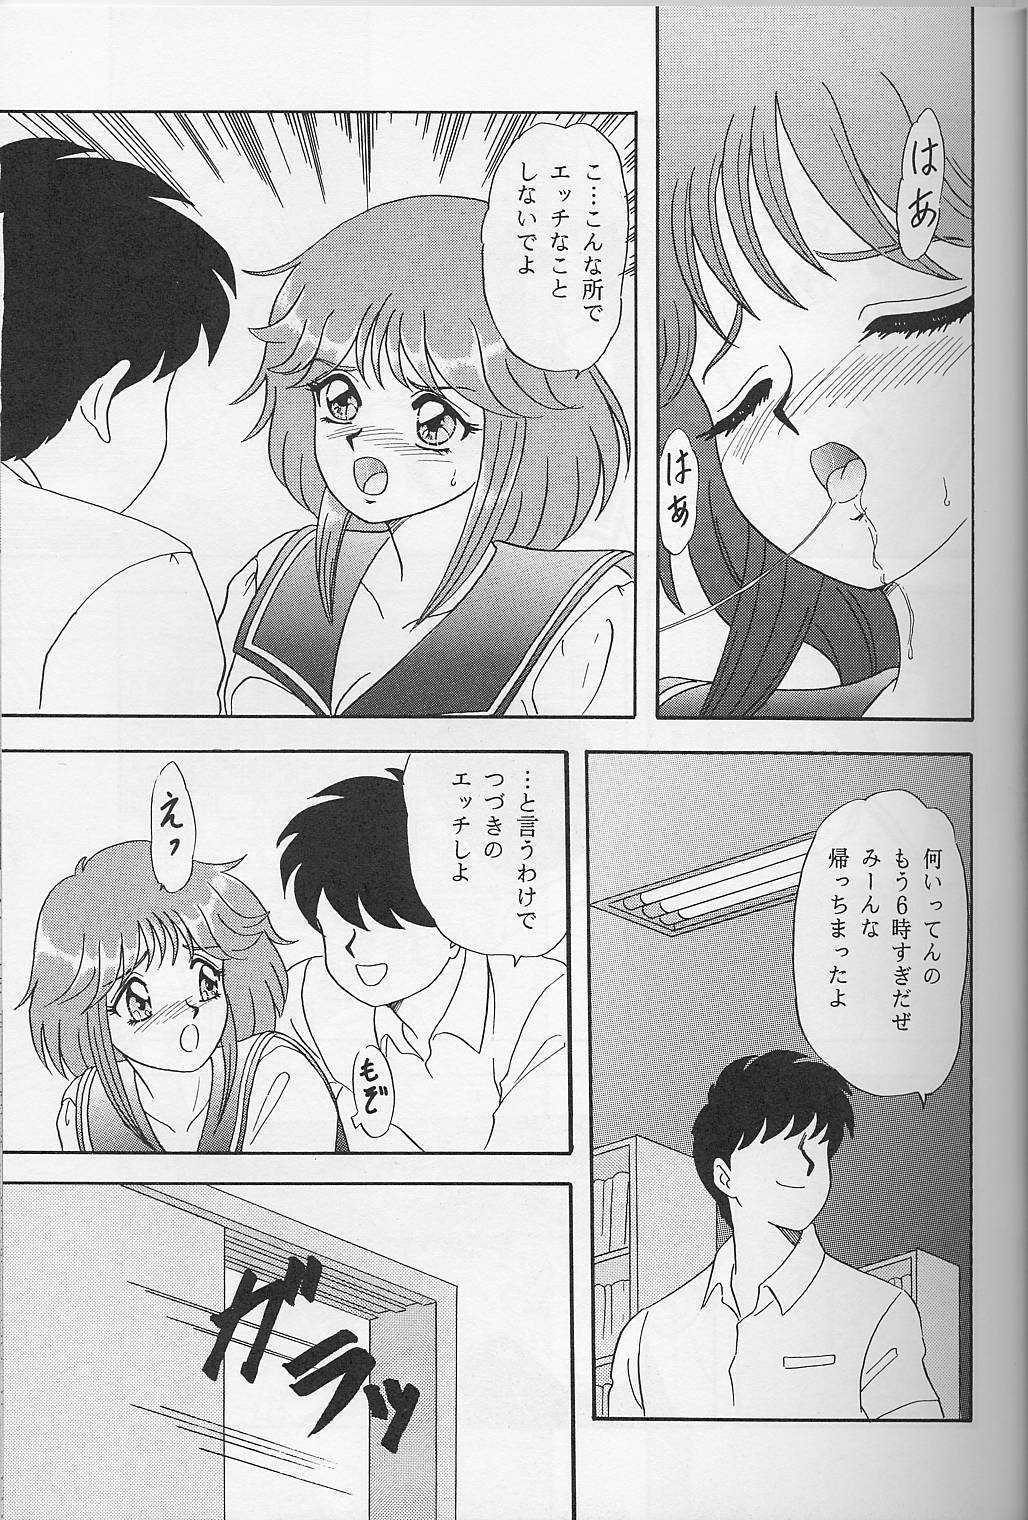 Firsttime Lunch Time 7 - Tokimeki memorial Lesbiansex - Page 10